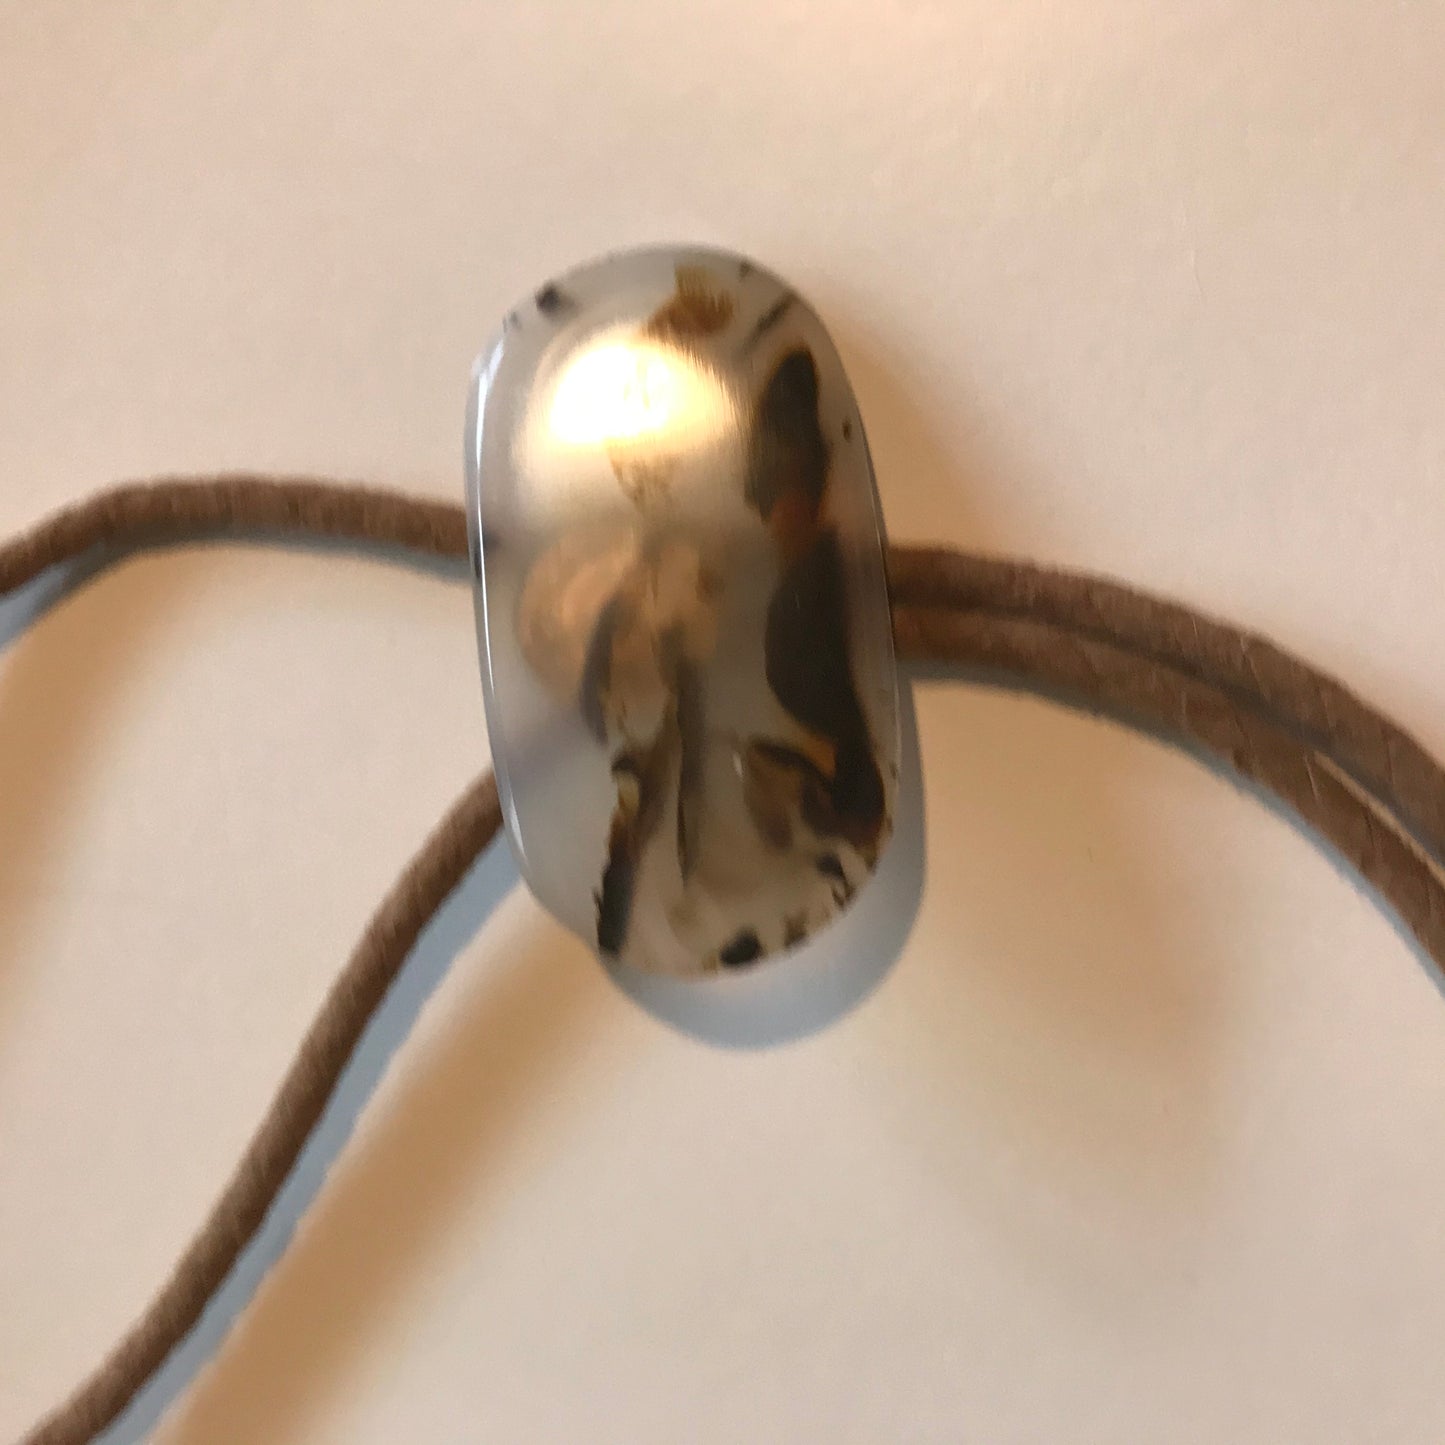 Sliced Montana Agate and Leather Bolo Tie circa 1950s